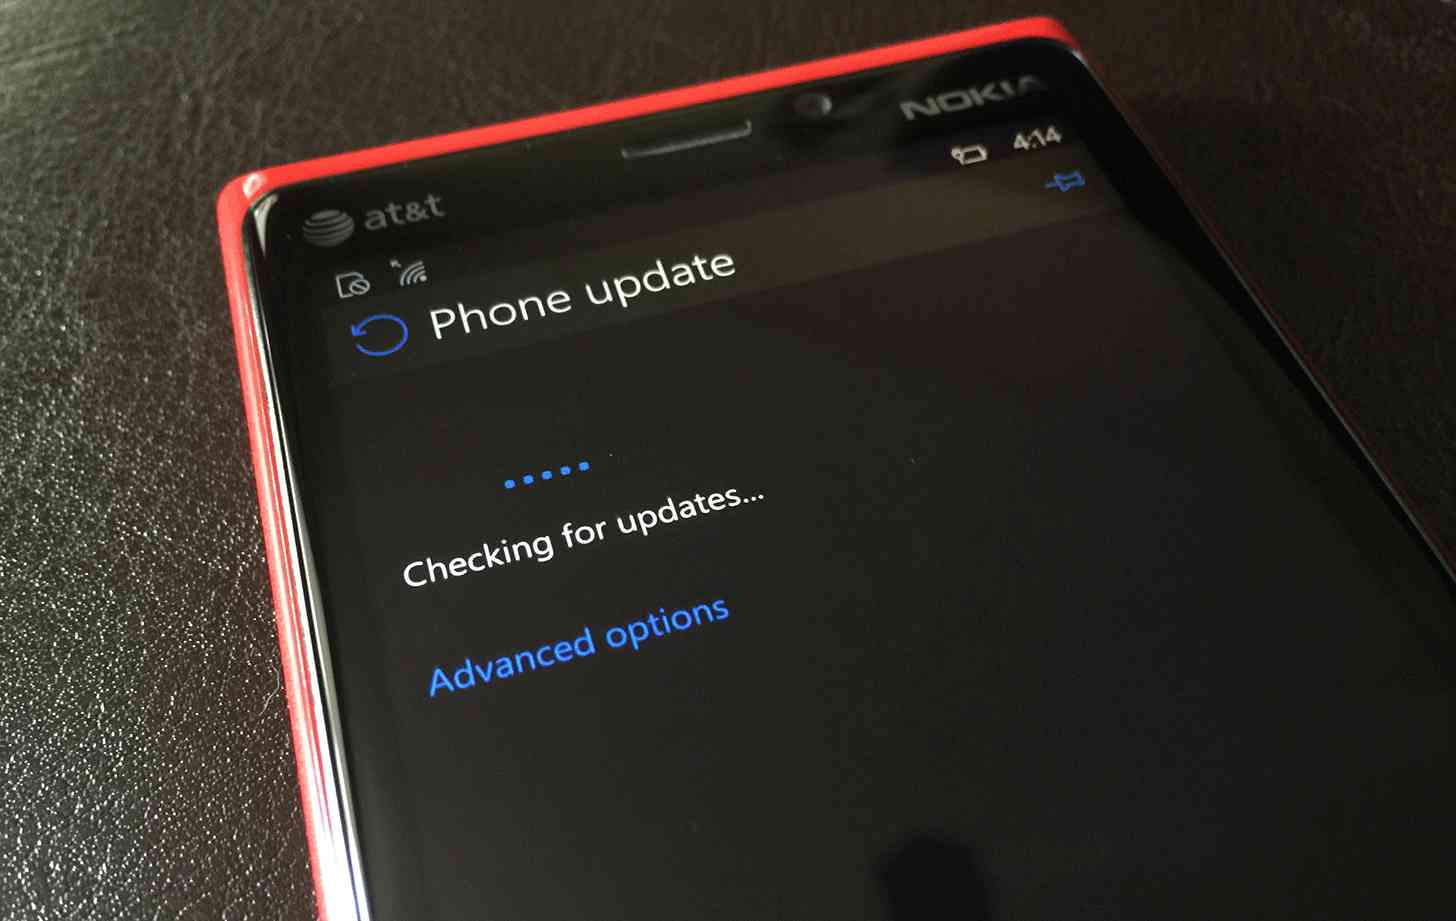 Windows 10 Mobile Insider Preview update